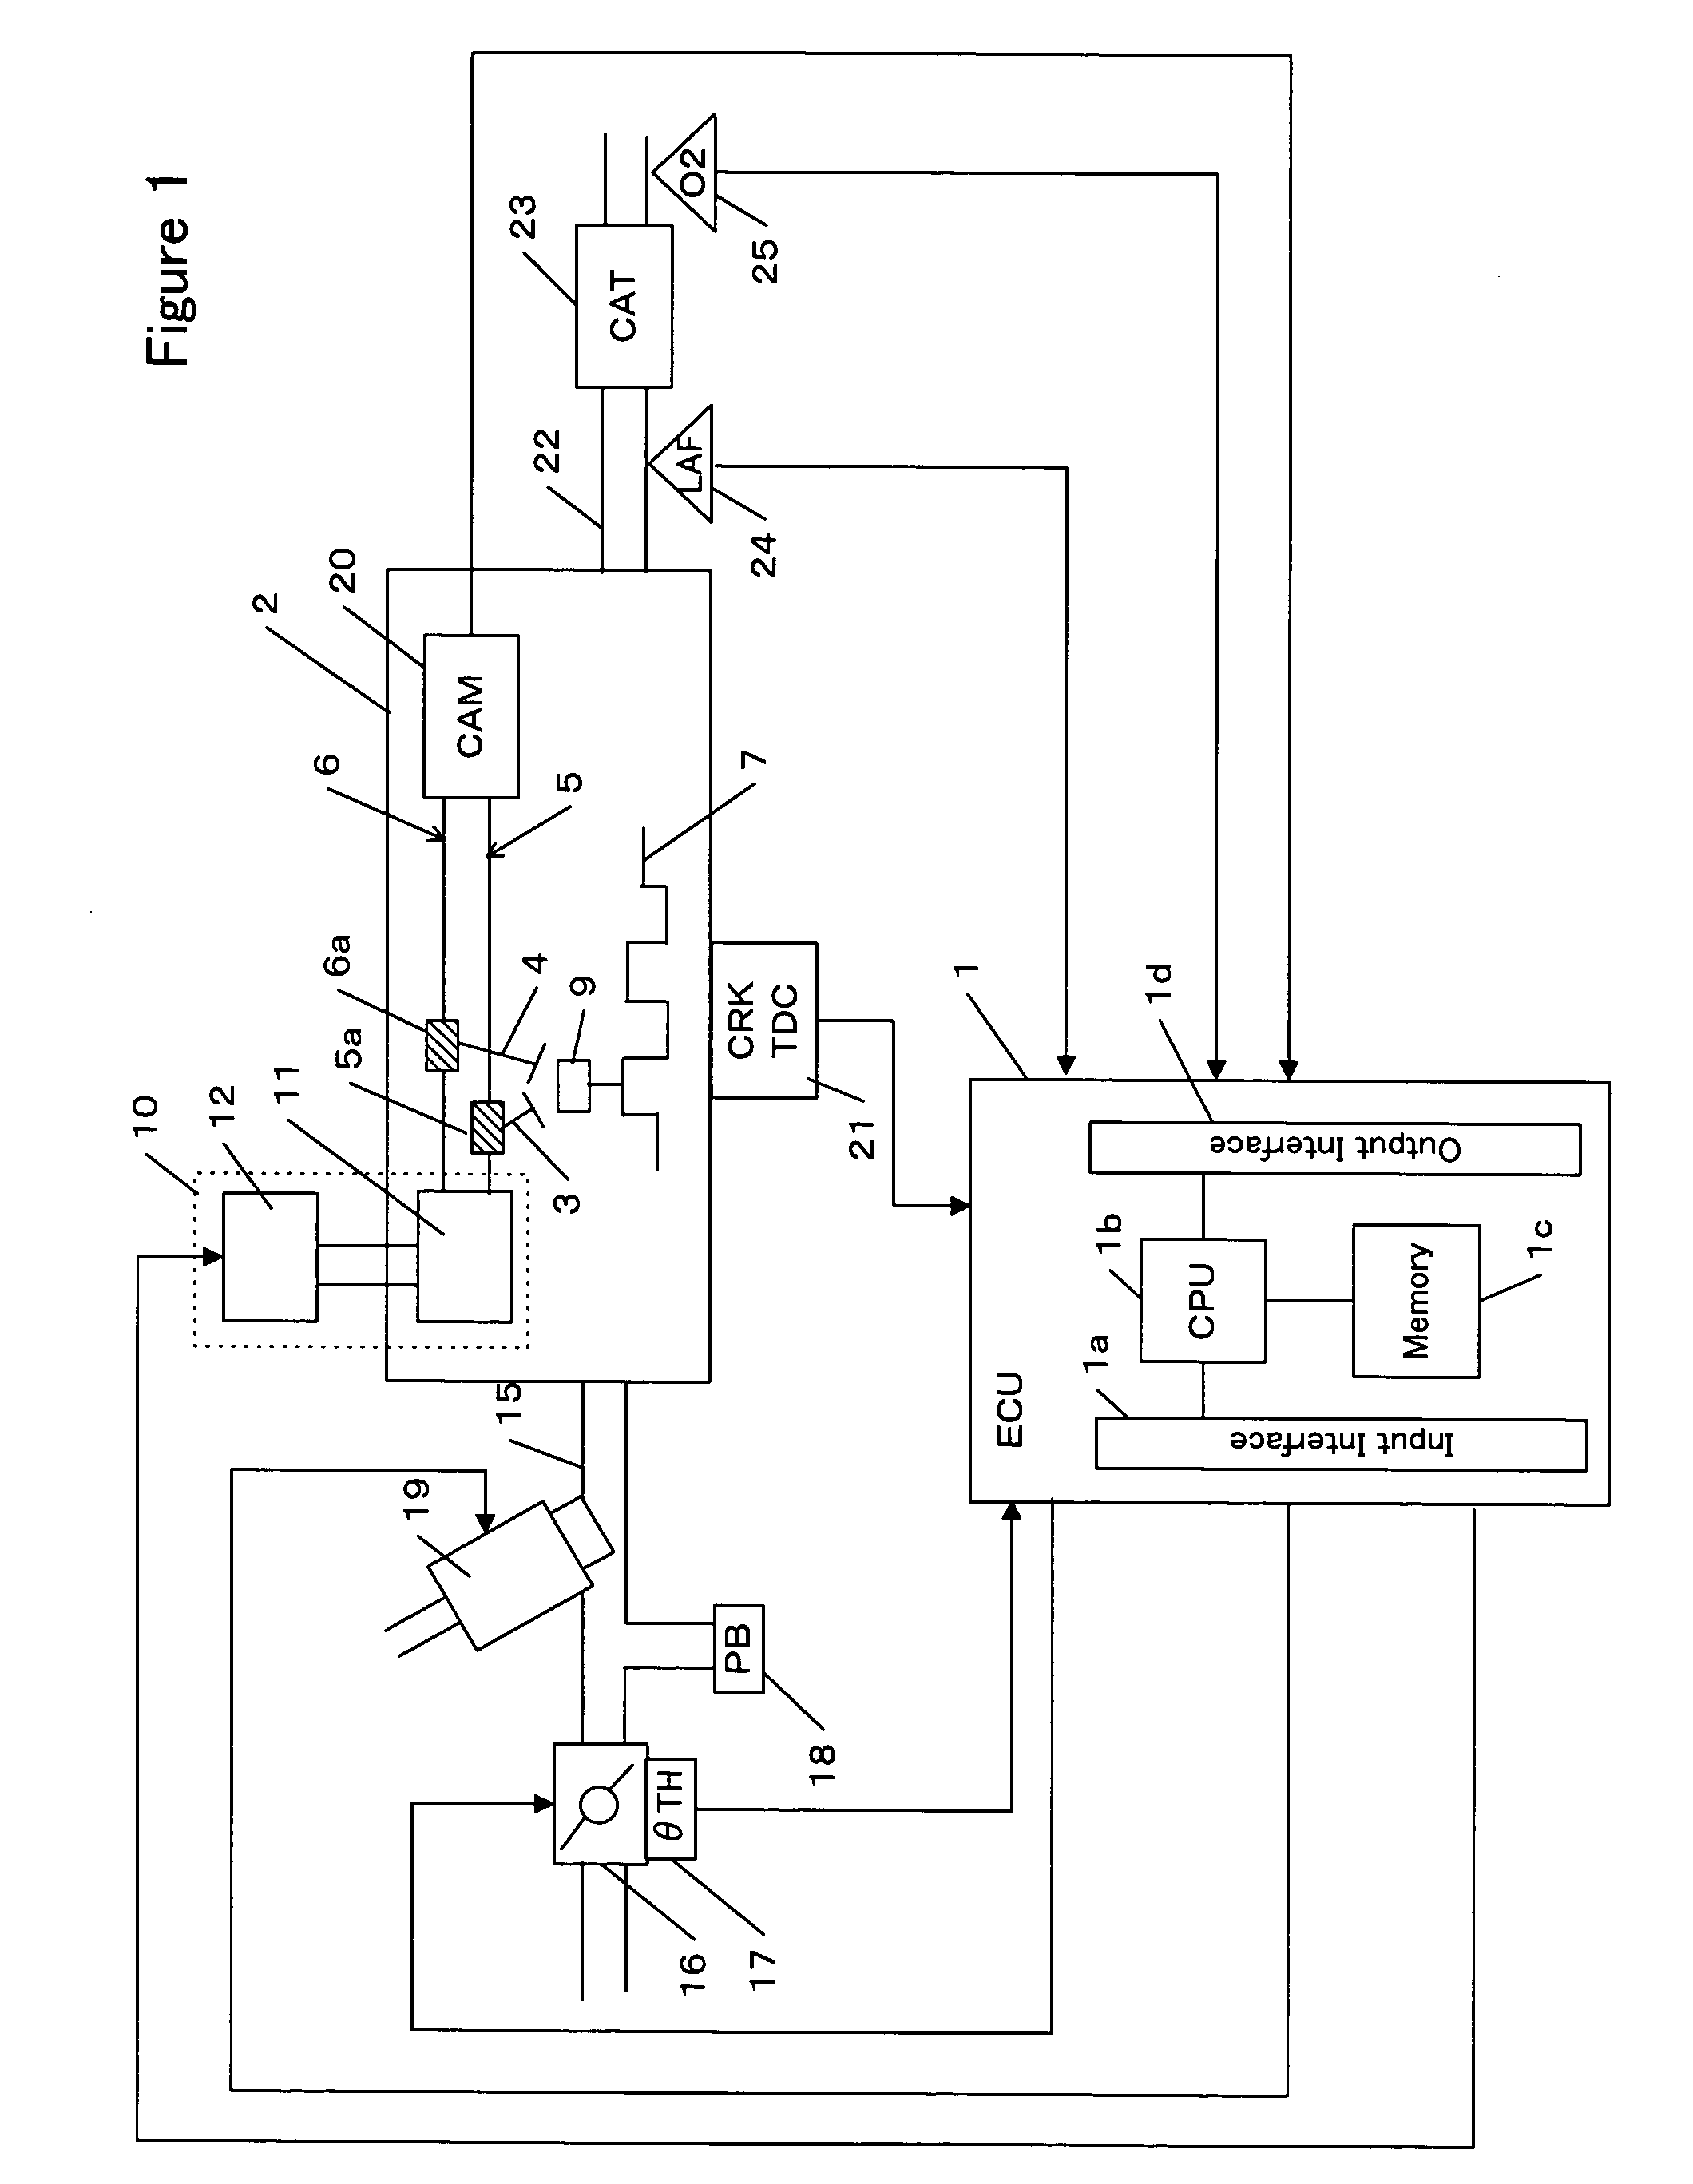 Control apparatus for controlling a plant by using a delta-sigma modulation